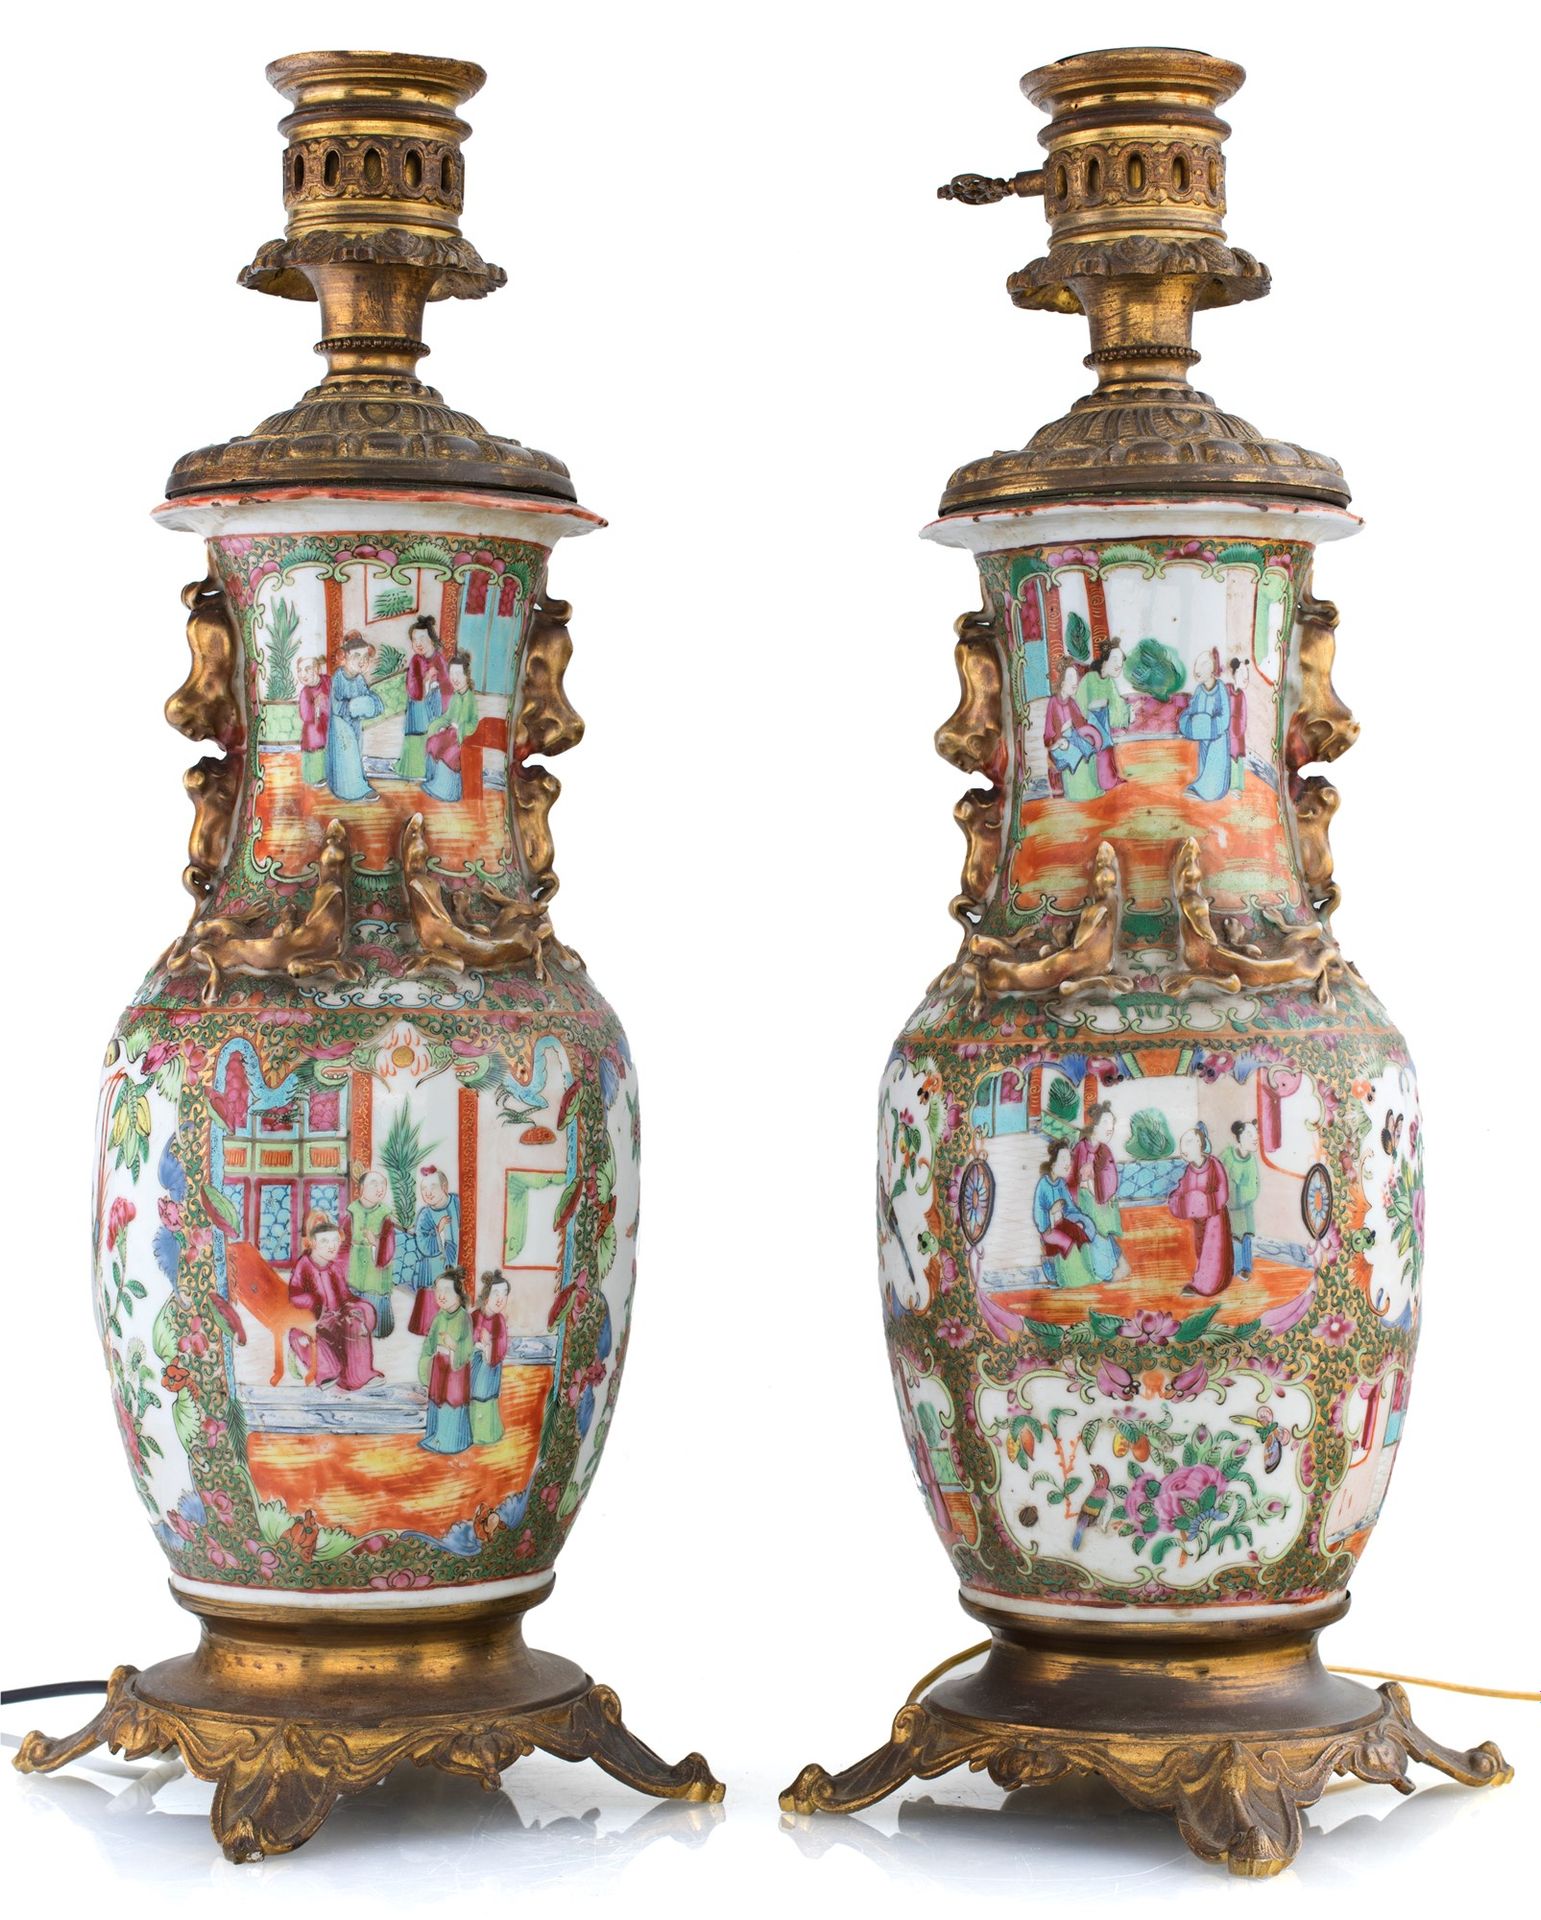 Pair of lamp-mounted Canton porcelain vases, 19th century decorated in lively po&hellip;